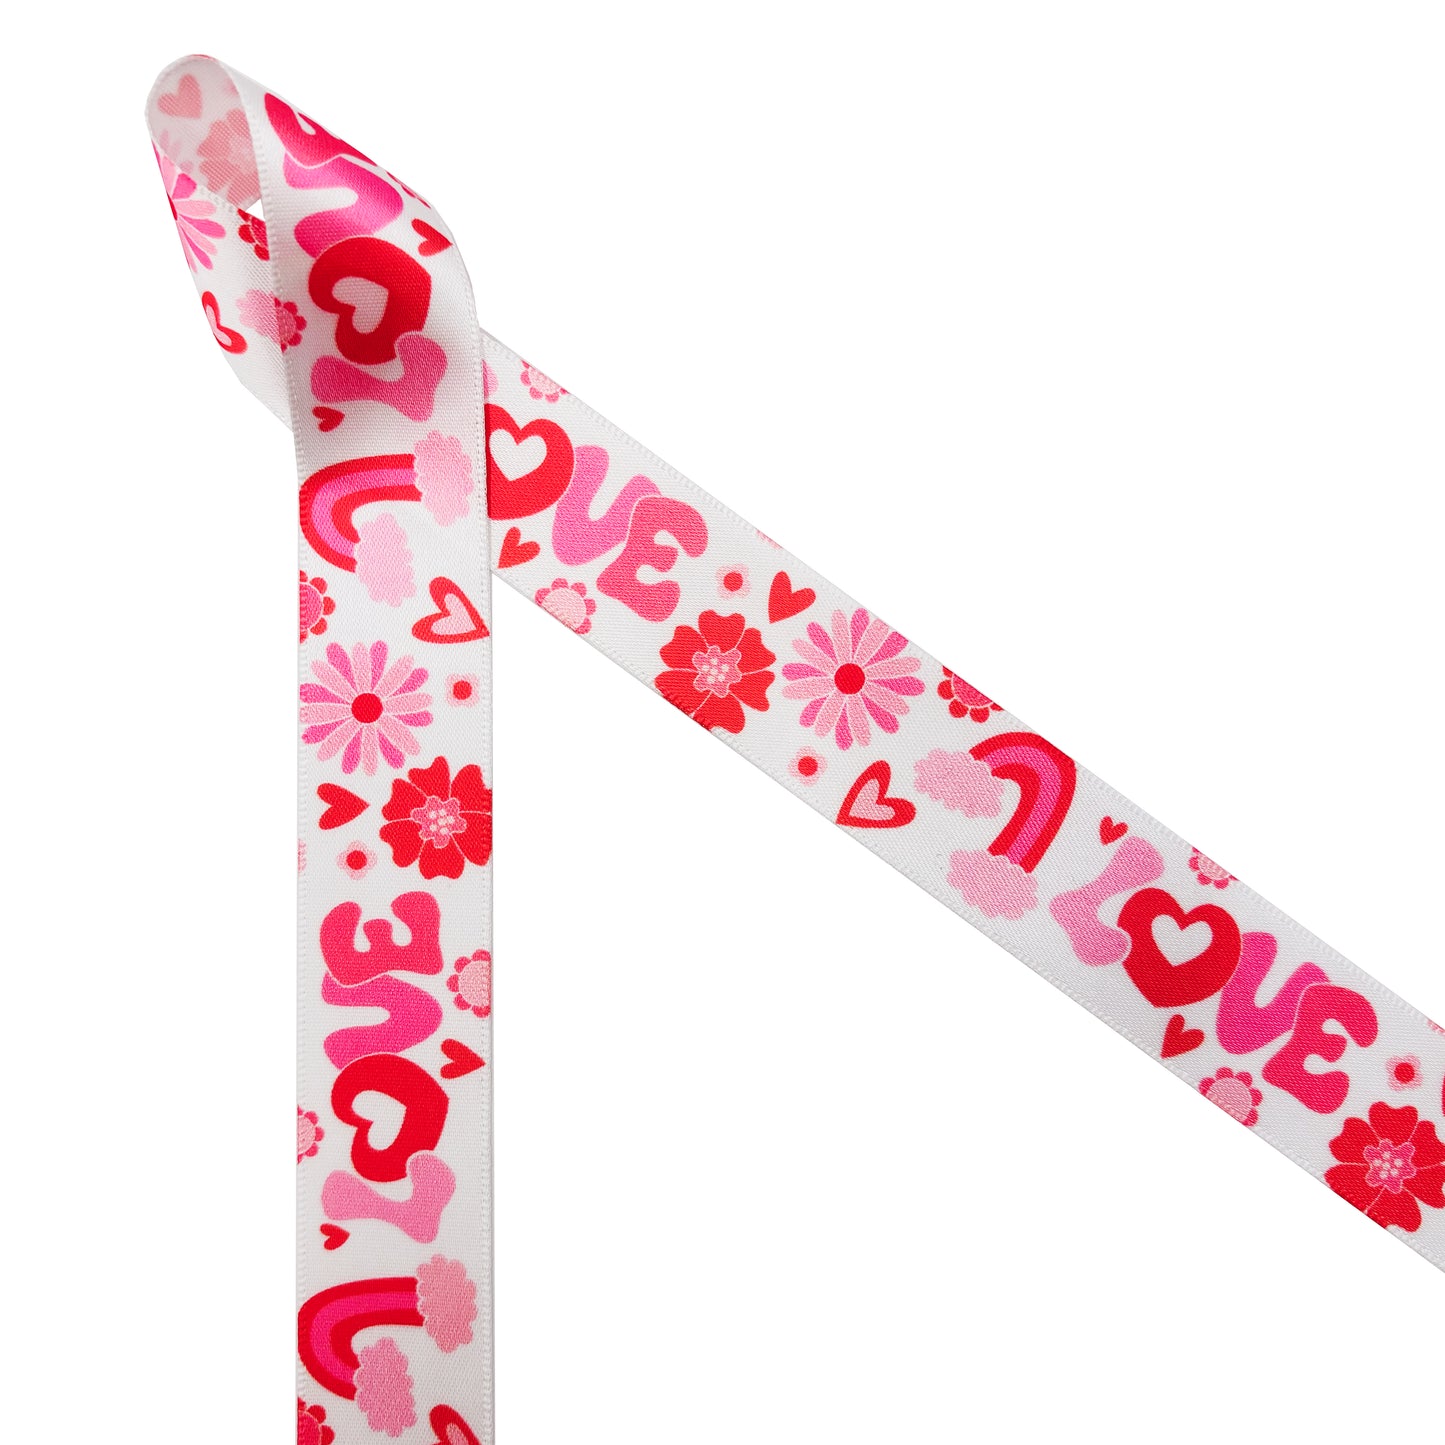 Valentine ribbon vintage design 1960's design with pink and red hearts and flowers, rainbows and LOVE  printed on 7/8" white satin